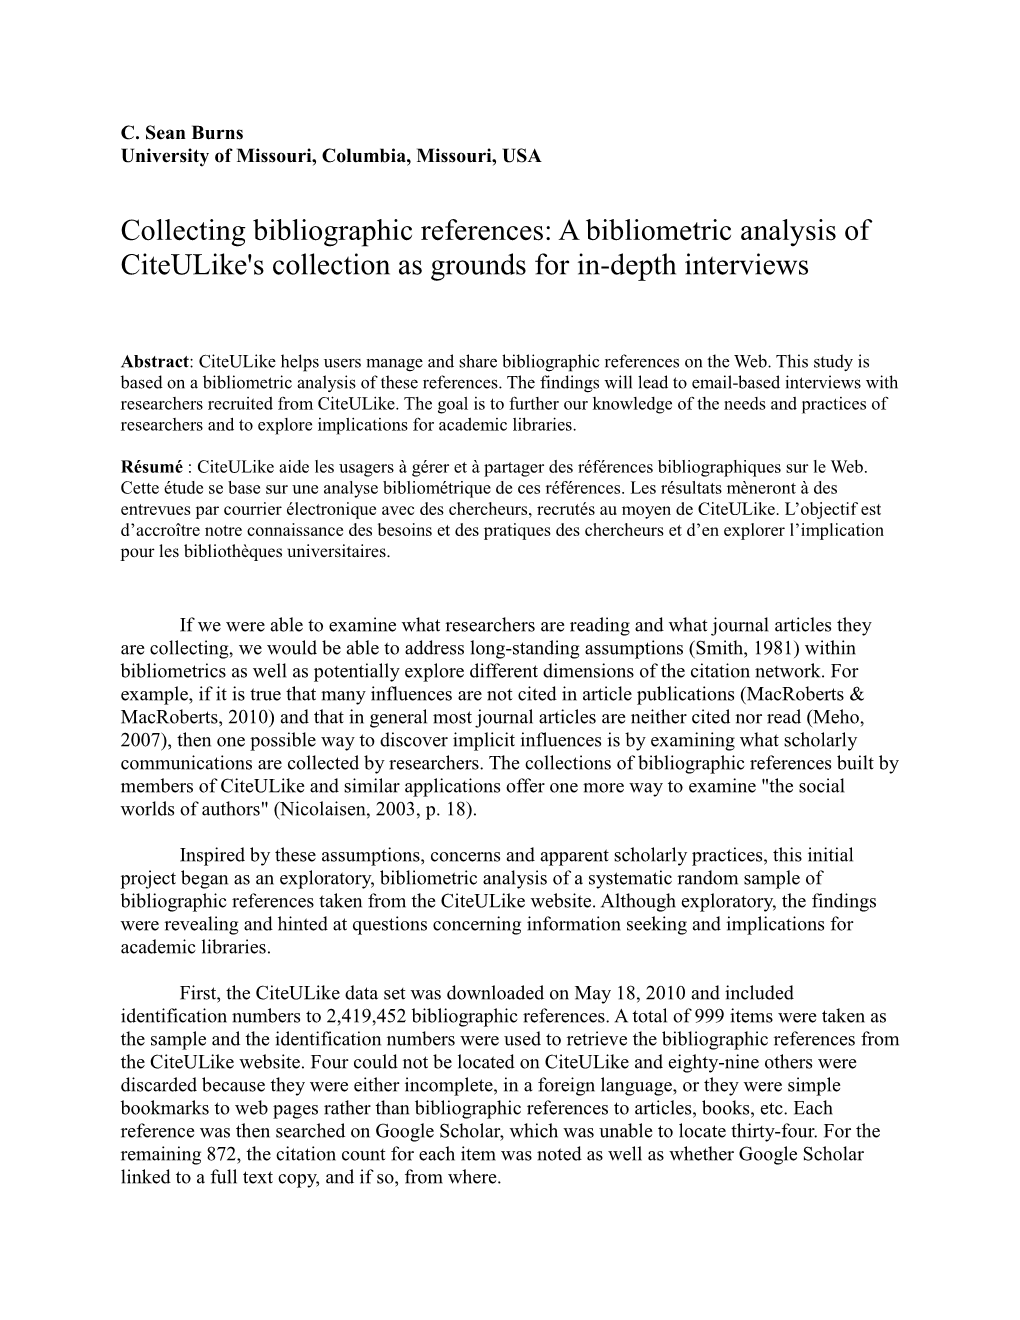 Collecting Bibliographic References: a Bibliometric Analysis of Citeulike's Collection As Grounds for In-Depth Interviews